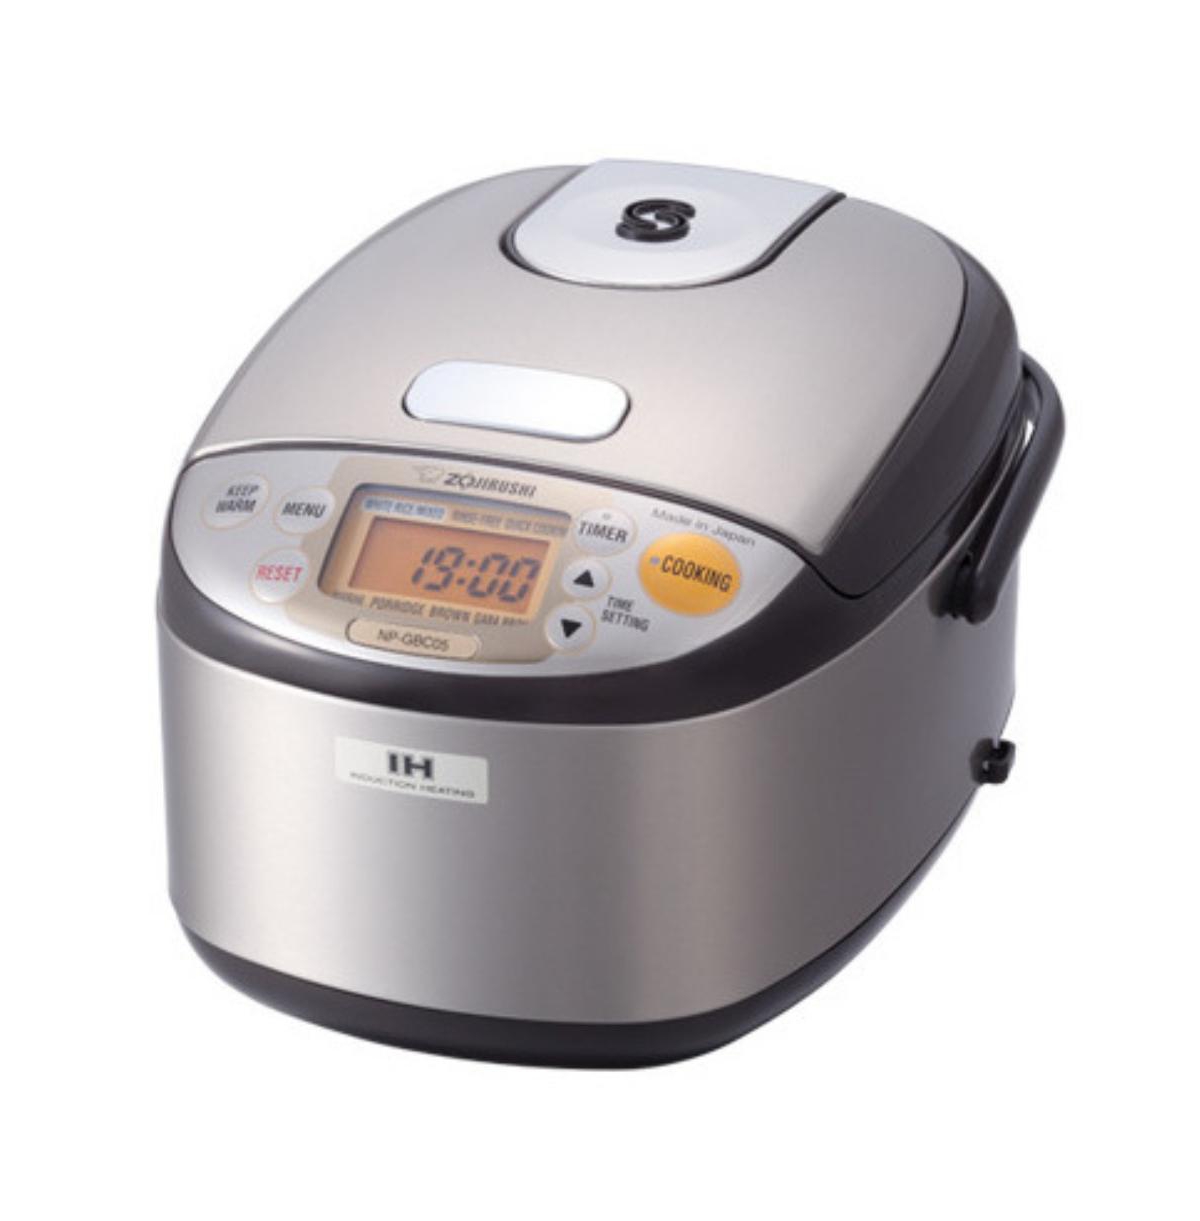 Induction Heating System Rice Cooker And Warmer (3-Cup) - Gold